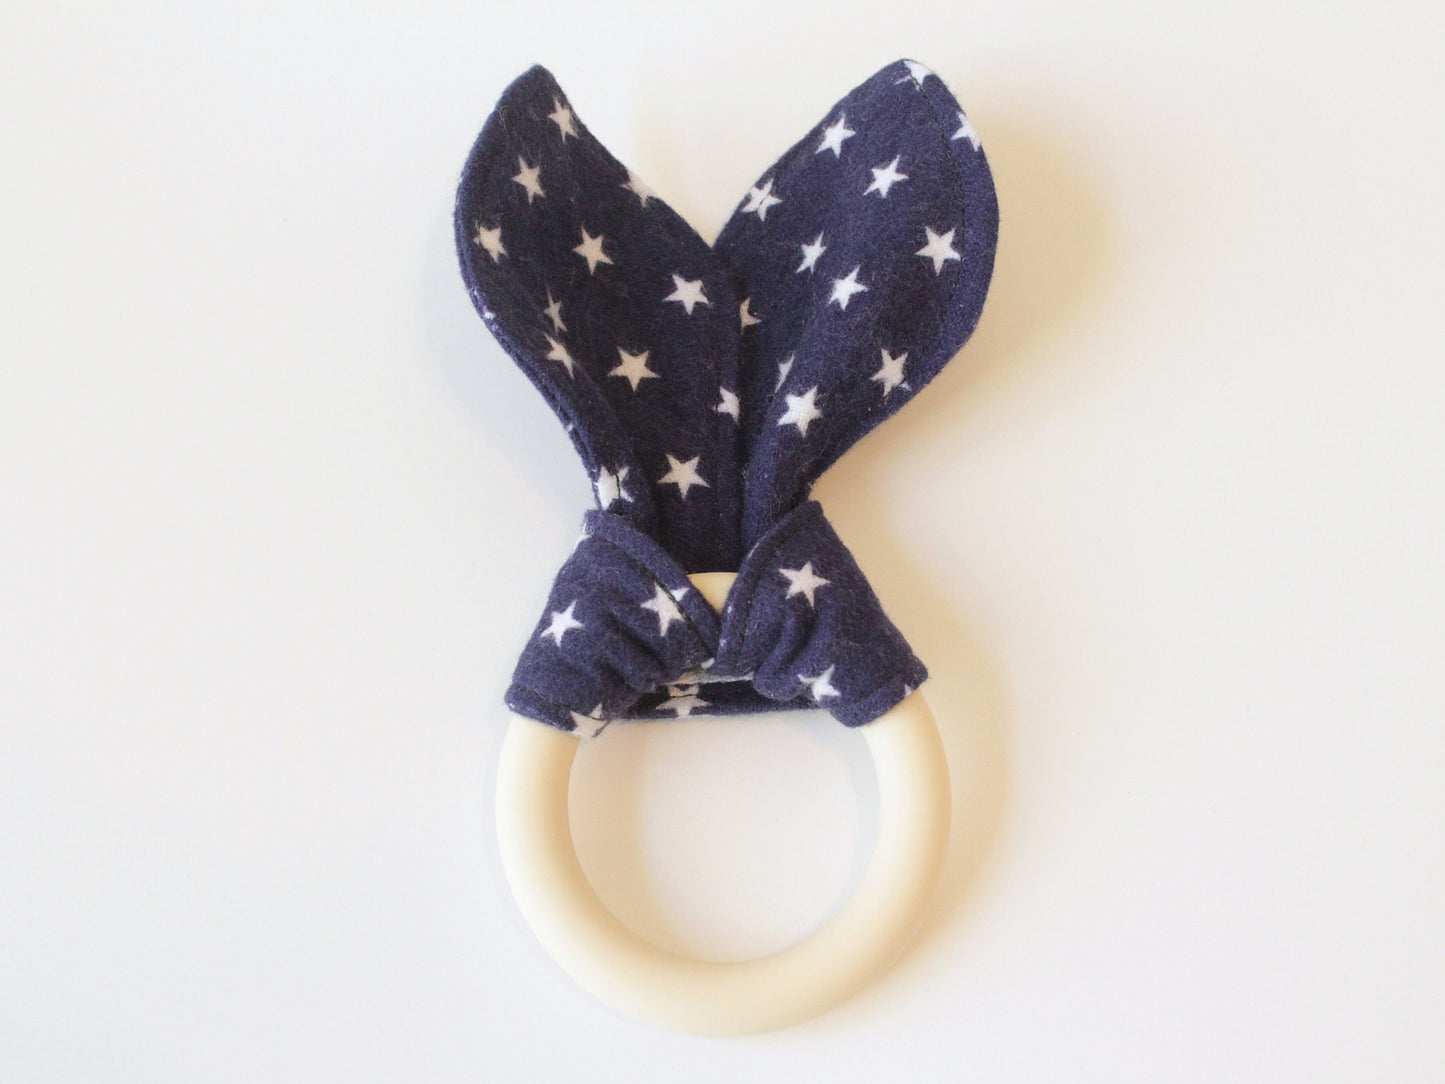 Blue Star Silicone Bunny Ear Teether | Gender Neutral Baby Shower Gift Sensory Toy | CPSC Compliant